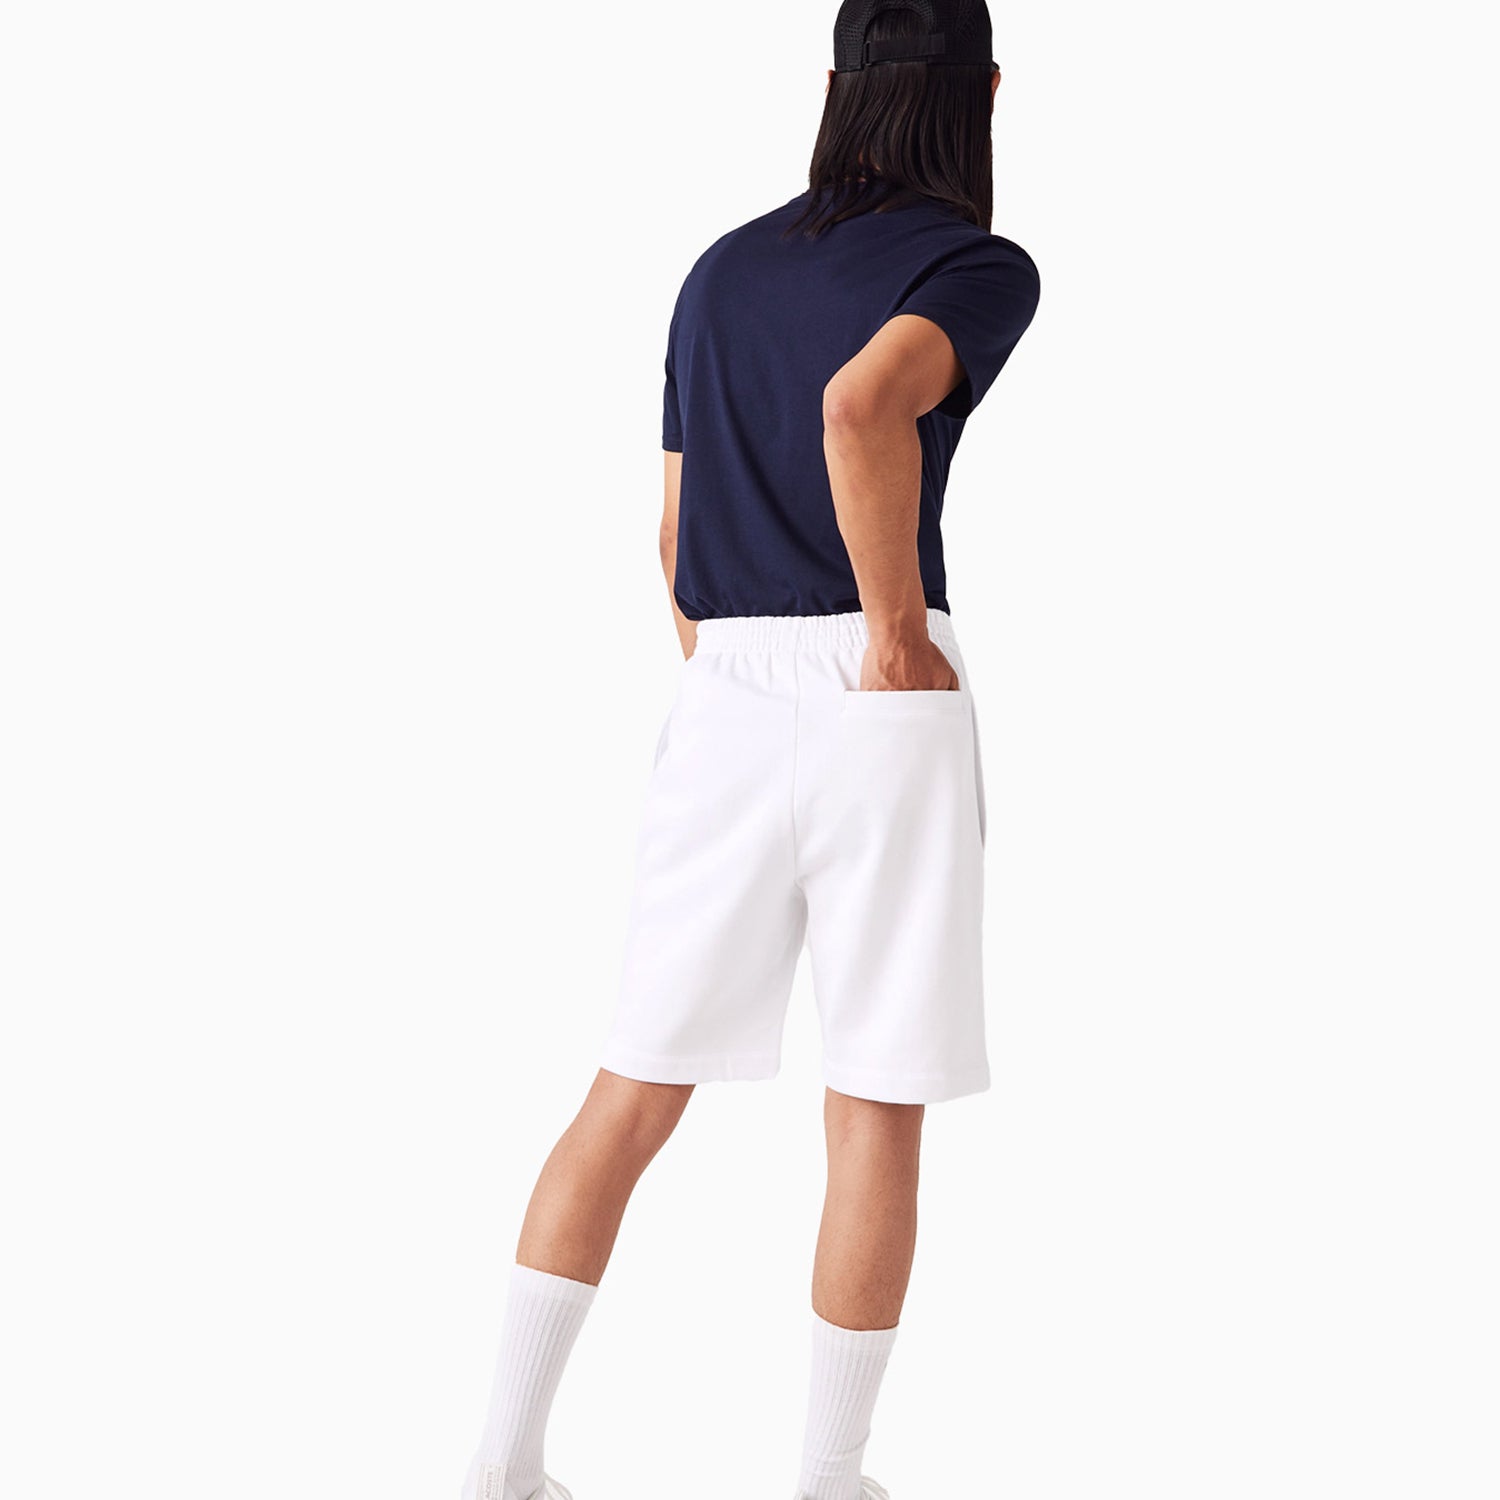 lacoste-mens-organic-brushed-cotton-fleece-shorts-gh9627-001